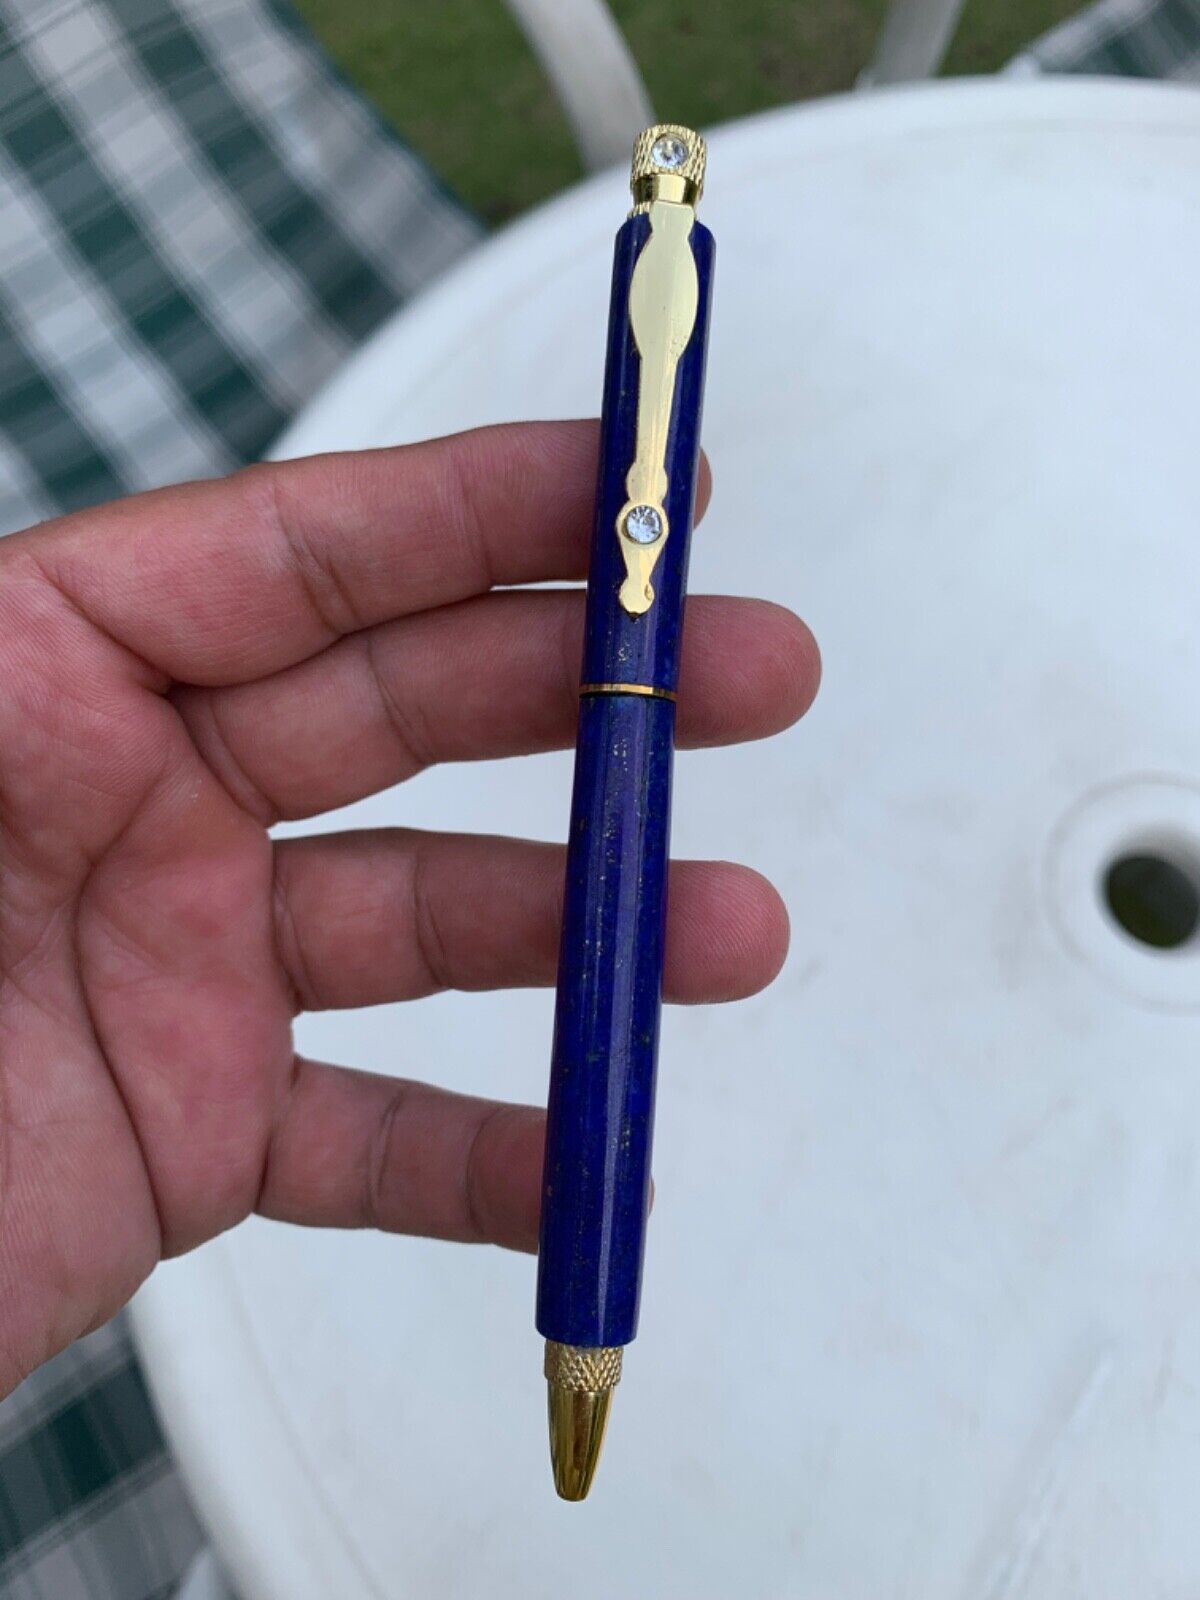 Handmade 100% natural lapis lazuli pen from Afghanistan ,unique pen for writing